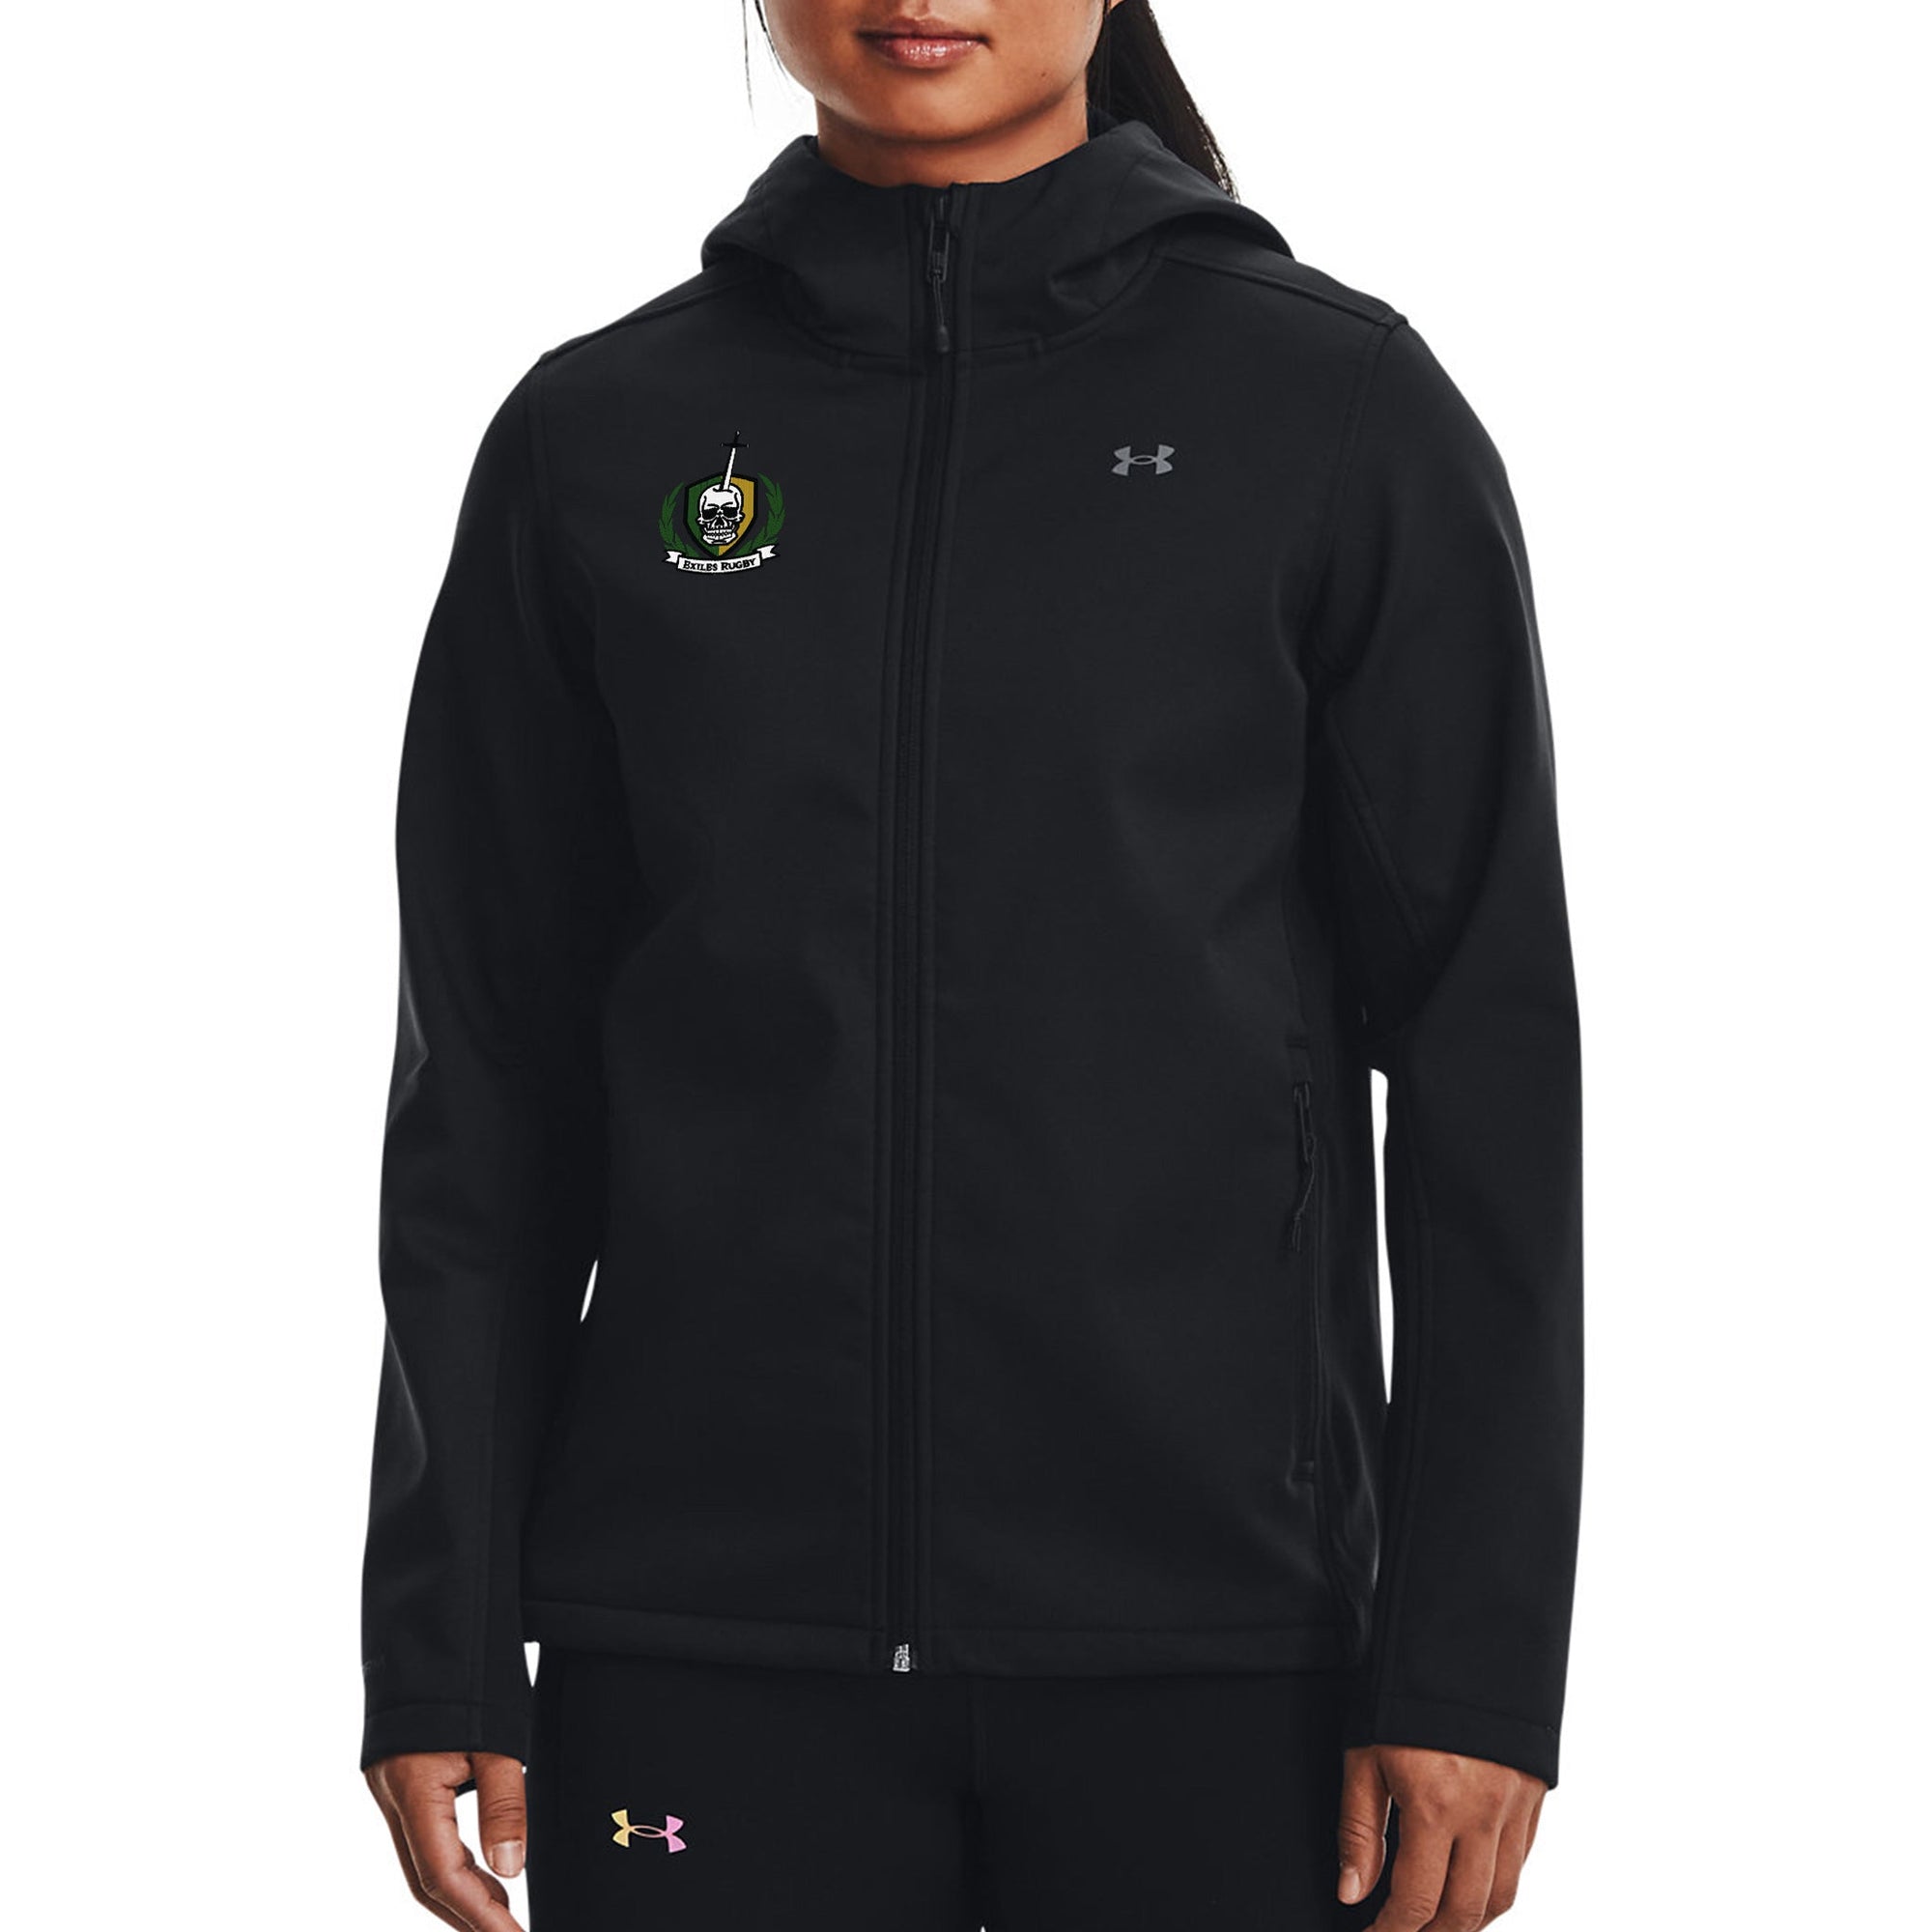 Rugby Imports Exiles RFC Women's Coldgear Hooded Infrared Jacket